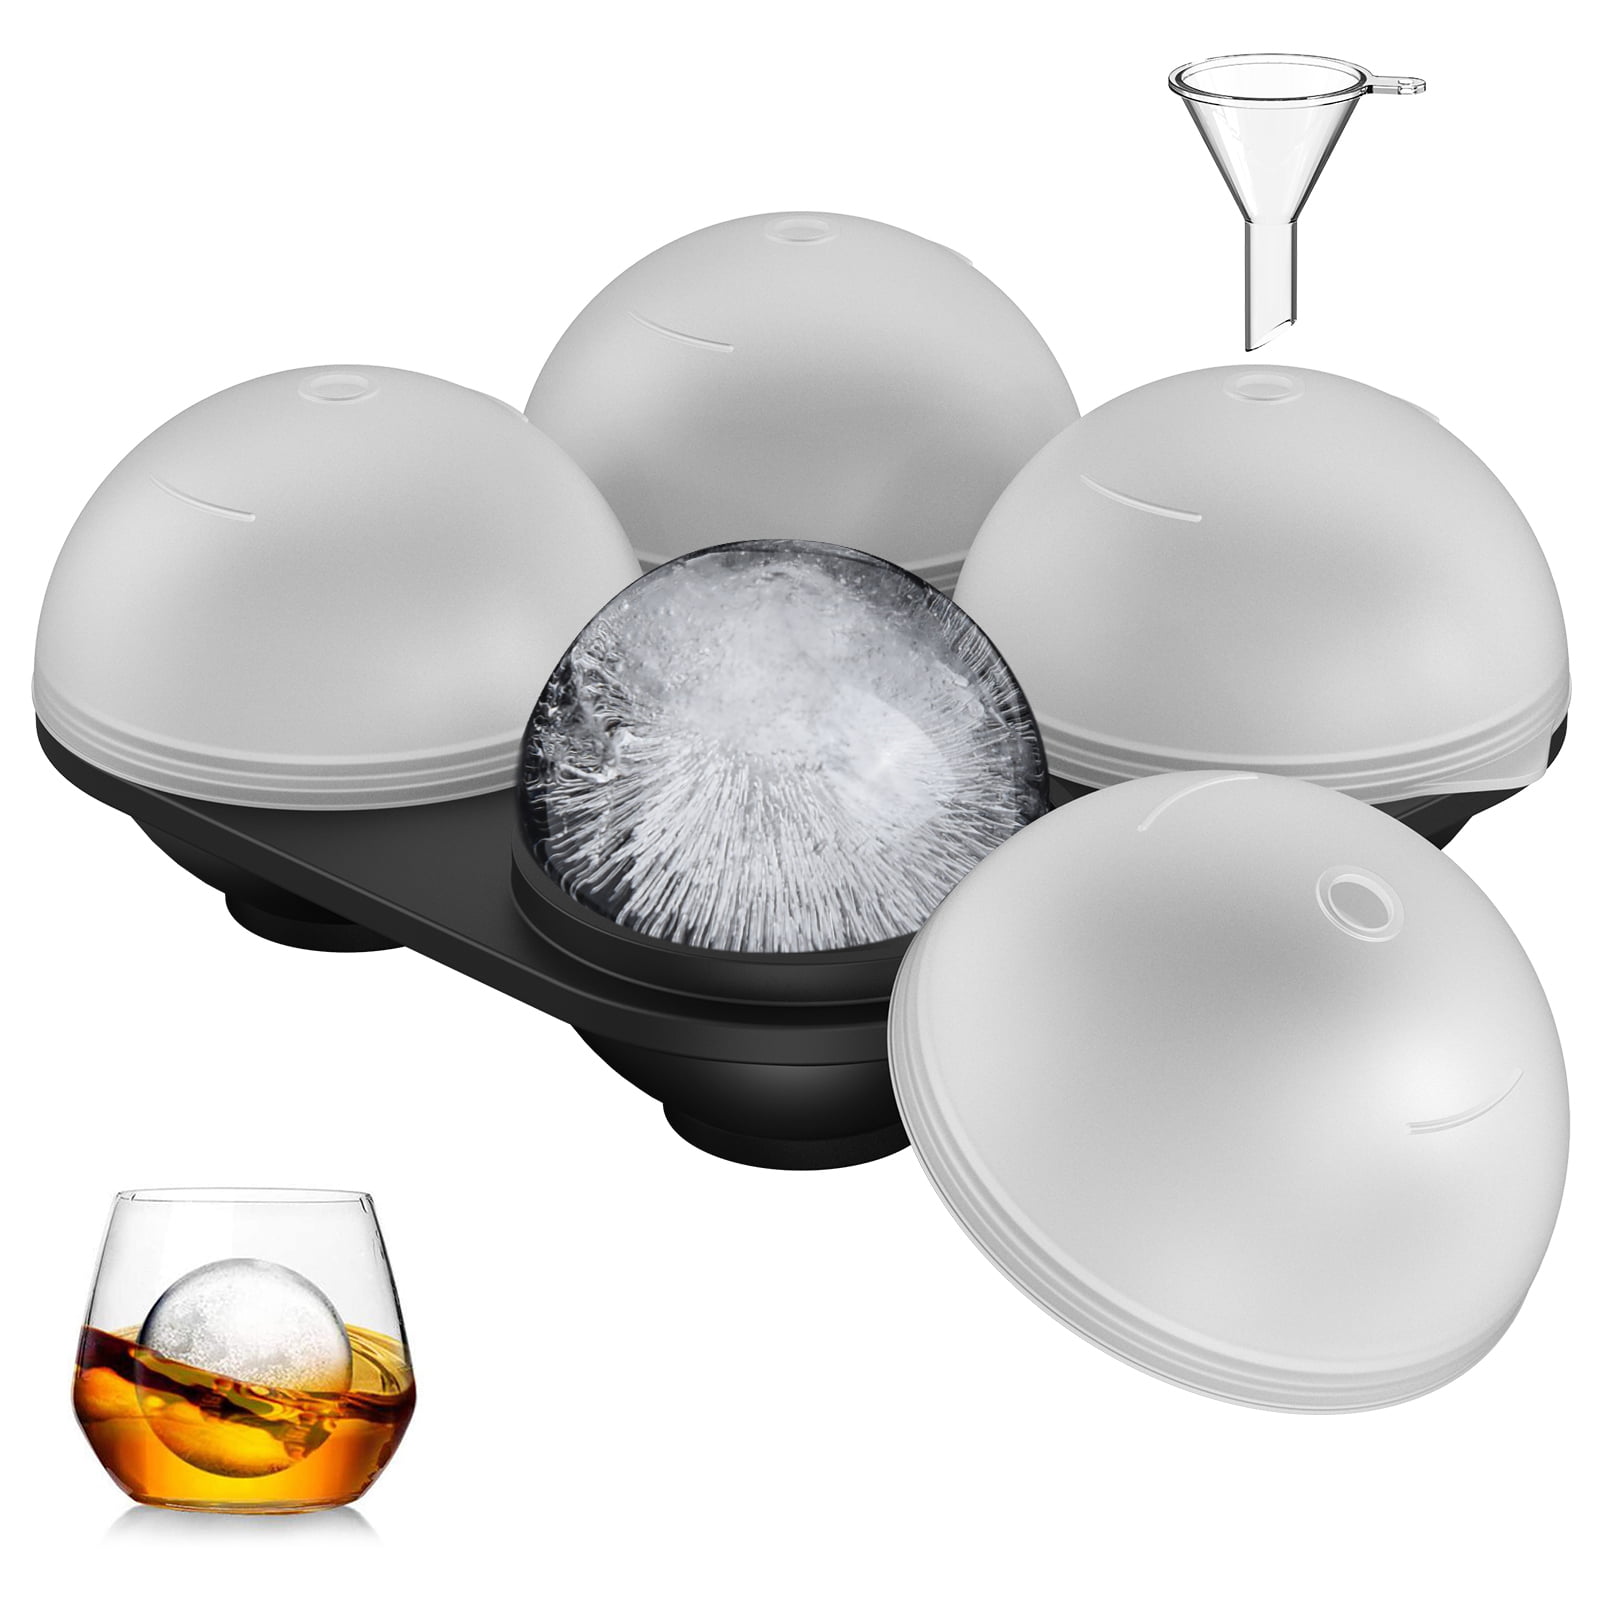 New 6CM Round Ball Ice Cube Mold Ice Cream Maker Silicone Ice Mould For Bar Too+